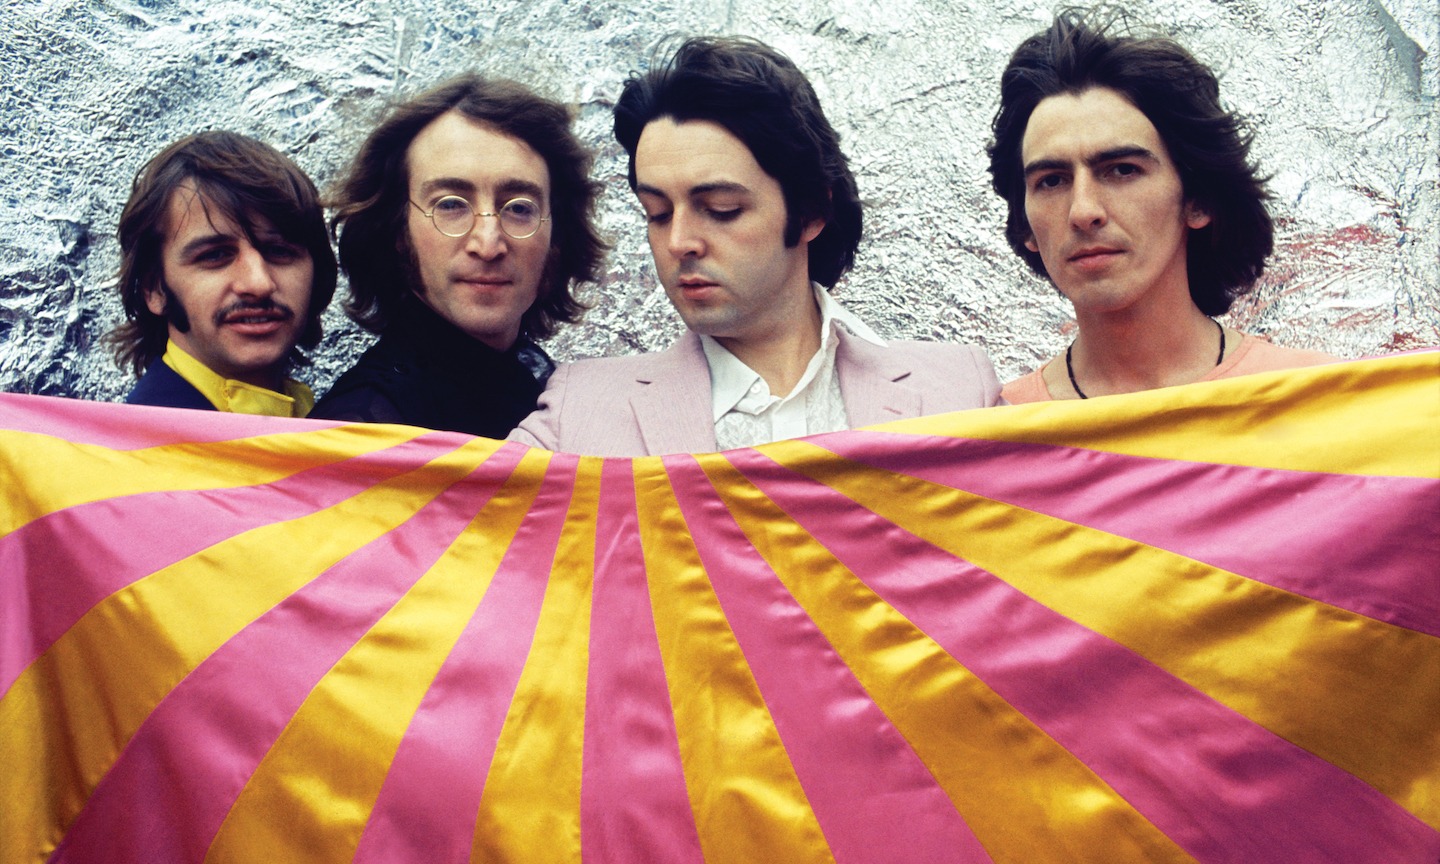 The Beatles And Peter Jackson Announce ‘Now And Then’ Music Video